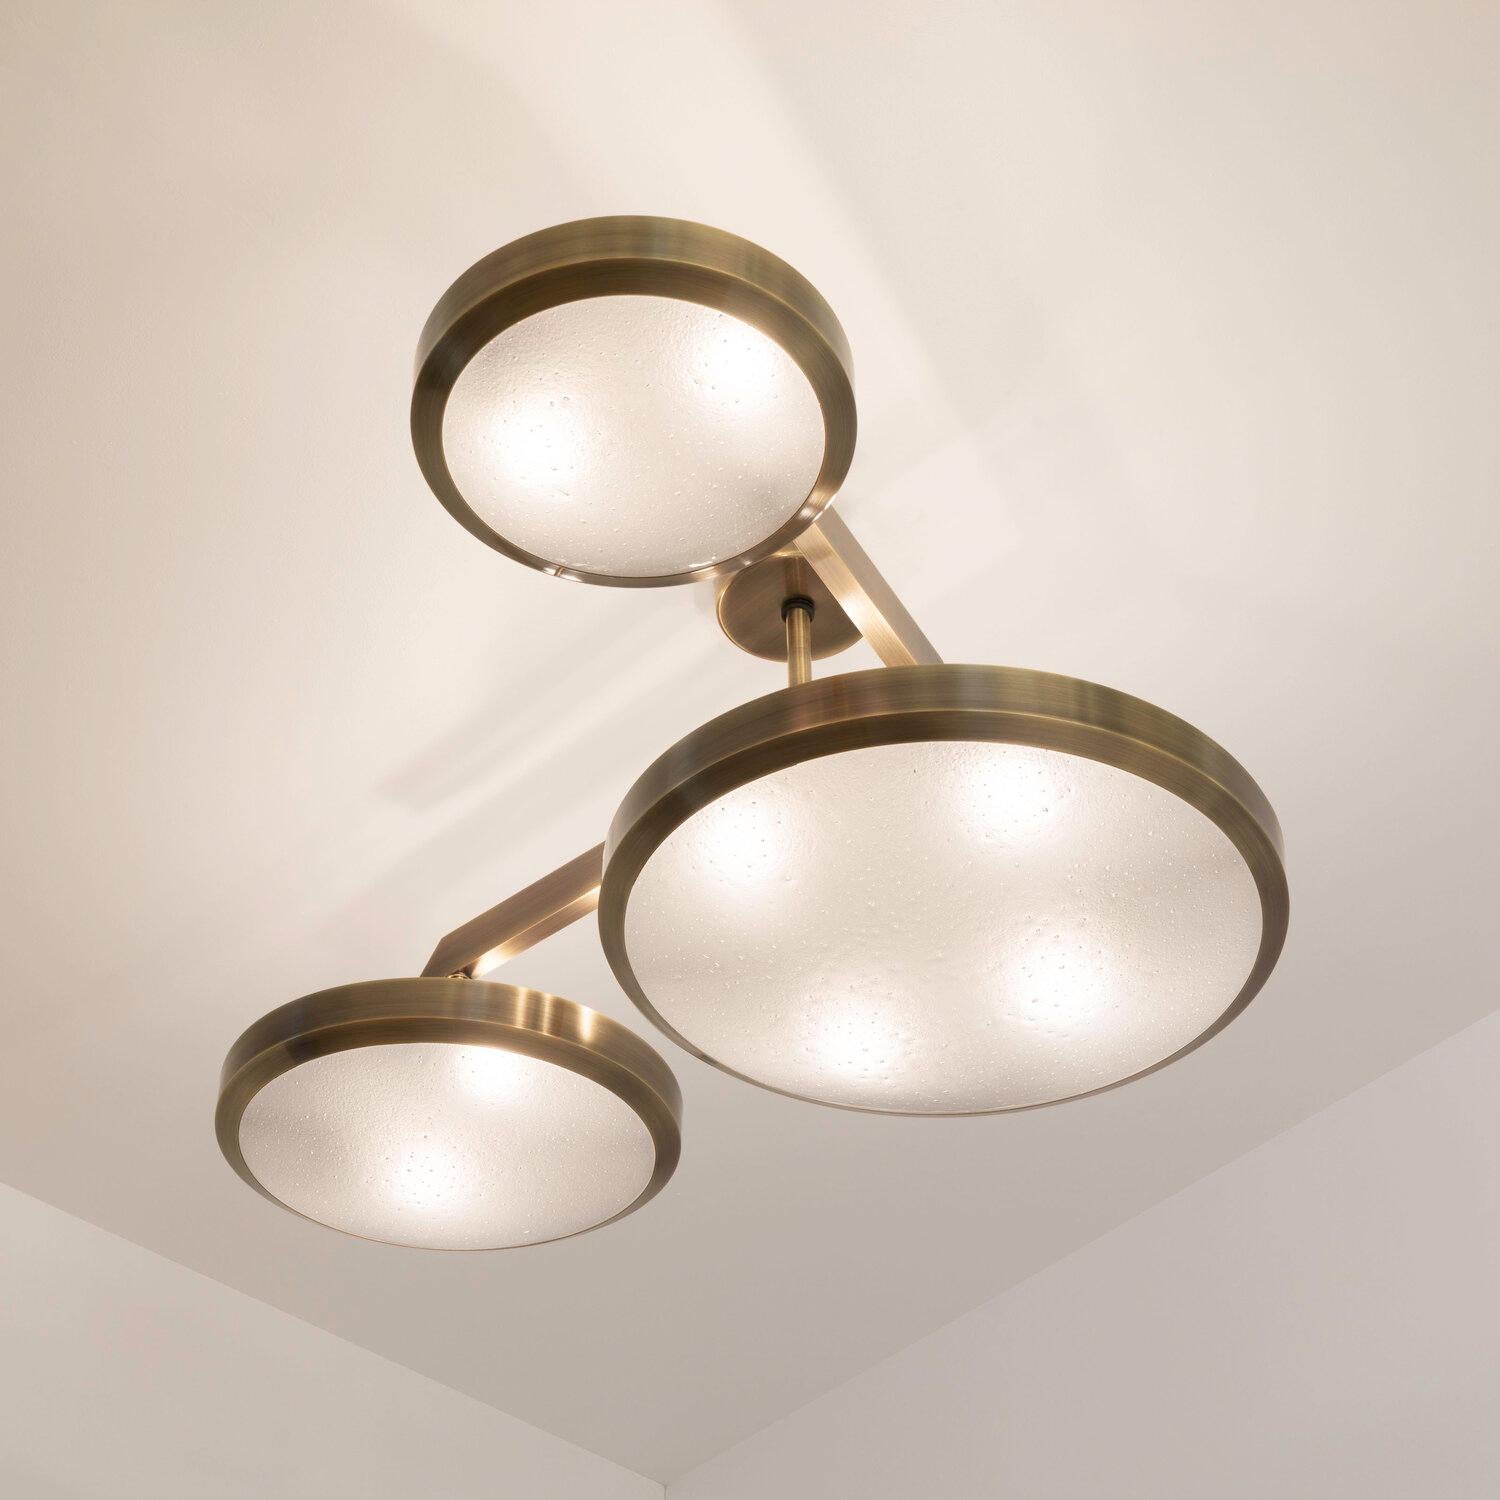 Zeta Ceiling Light by Gaspare Asaro-Satin Brass Finish For Sale 1